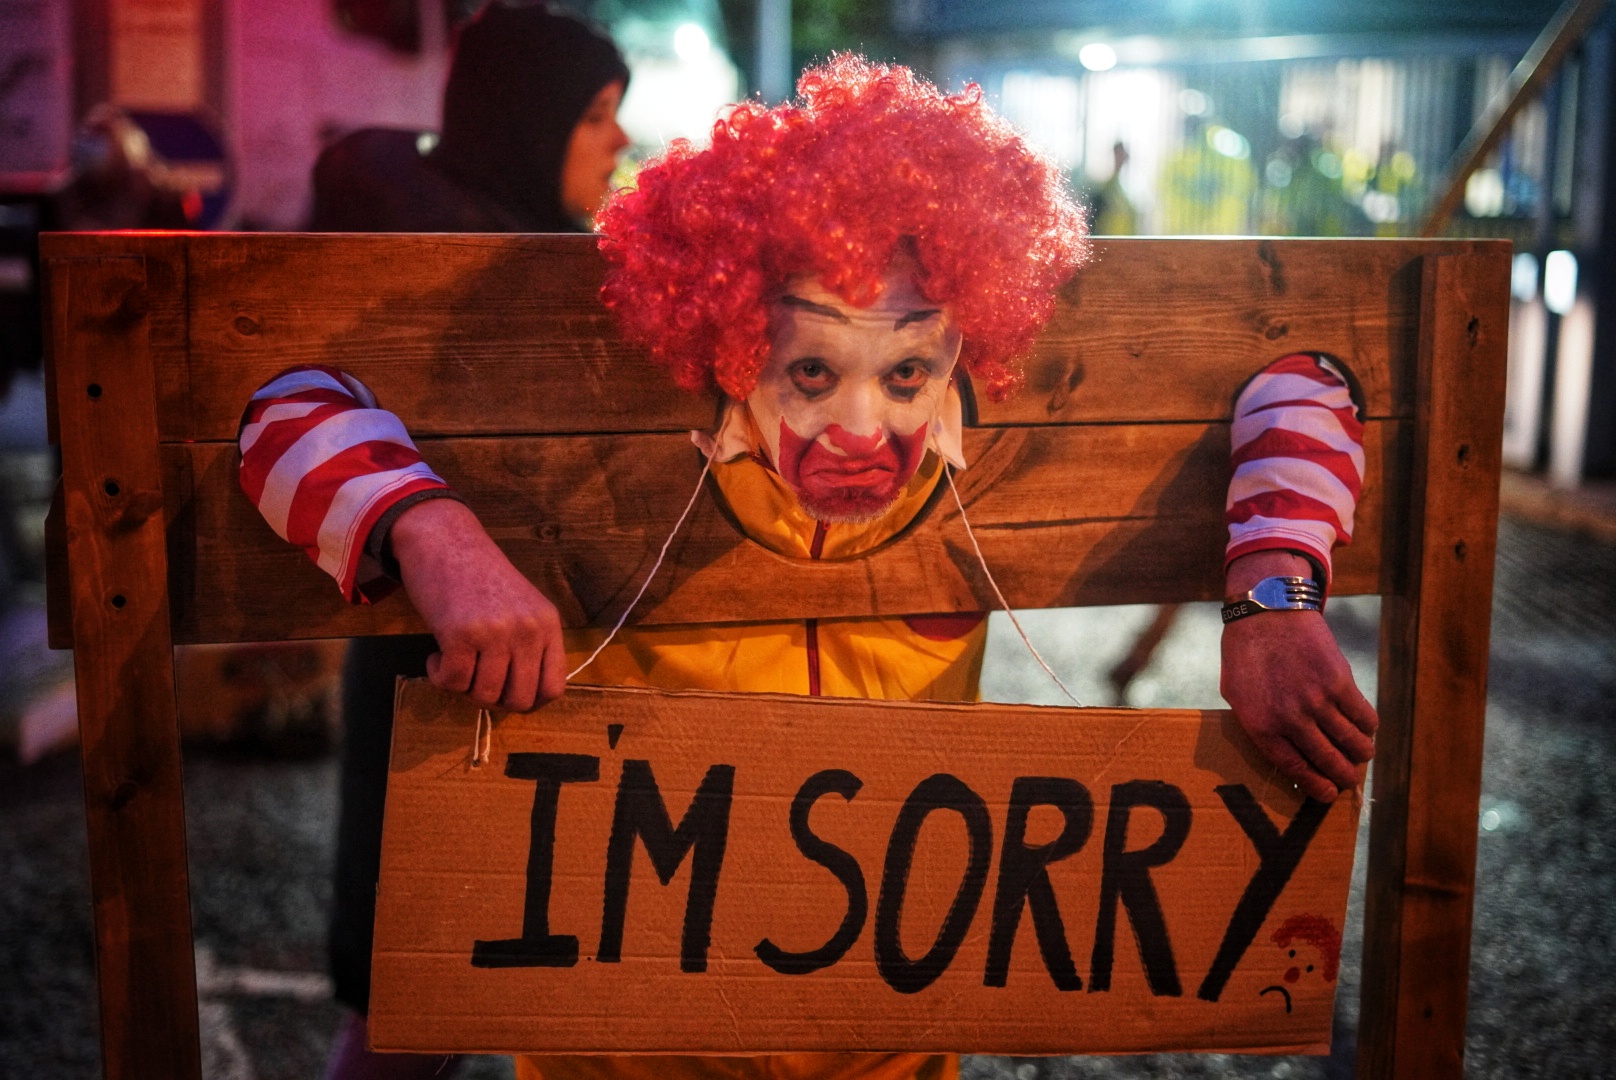 Photo of Alan dressed as Ronald McDonald stuck in a Medieval stock holding a sign that says "I'm sorry"